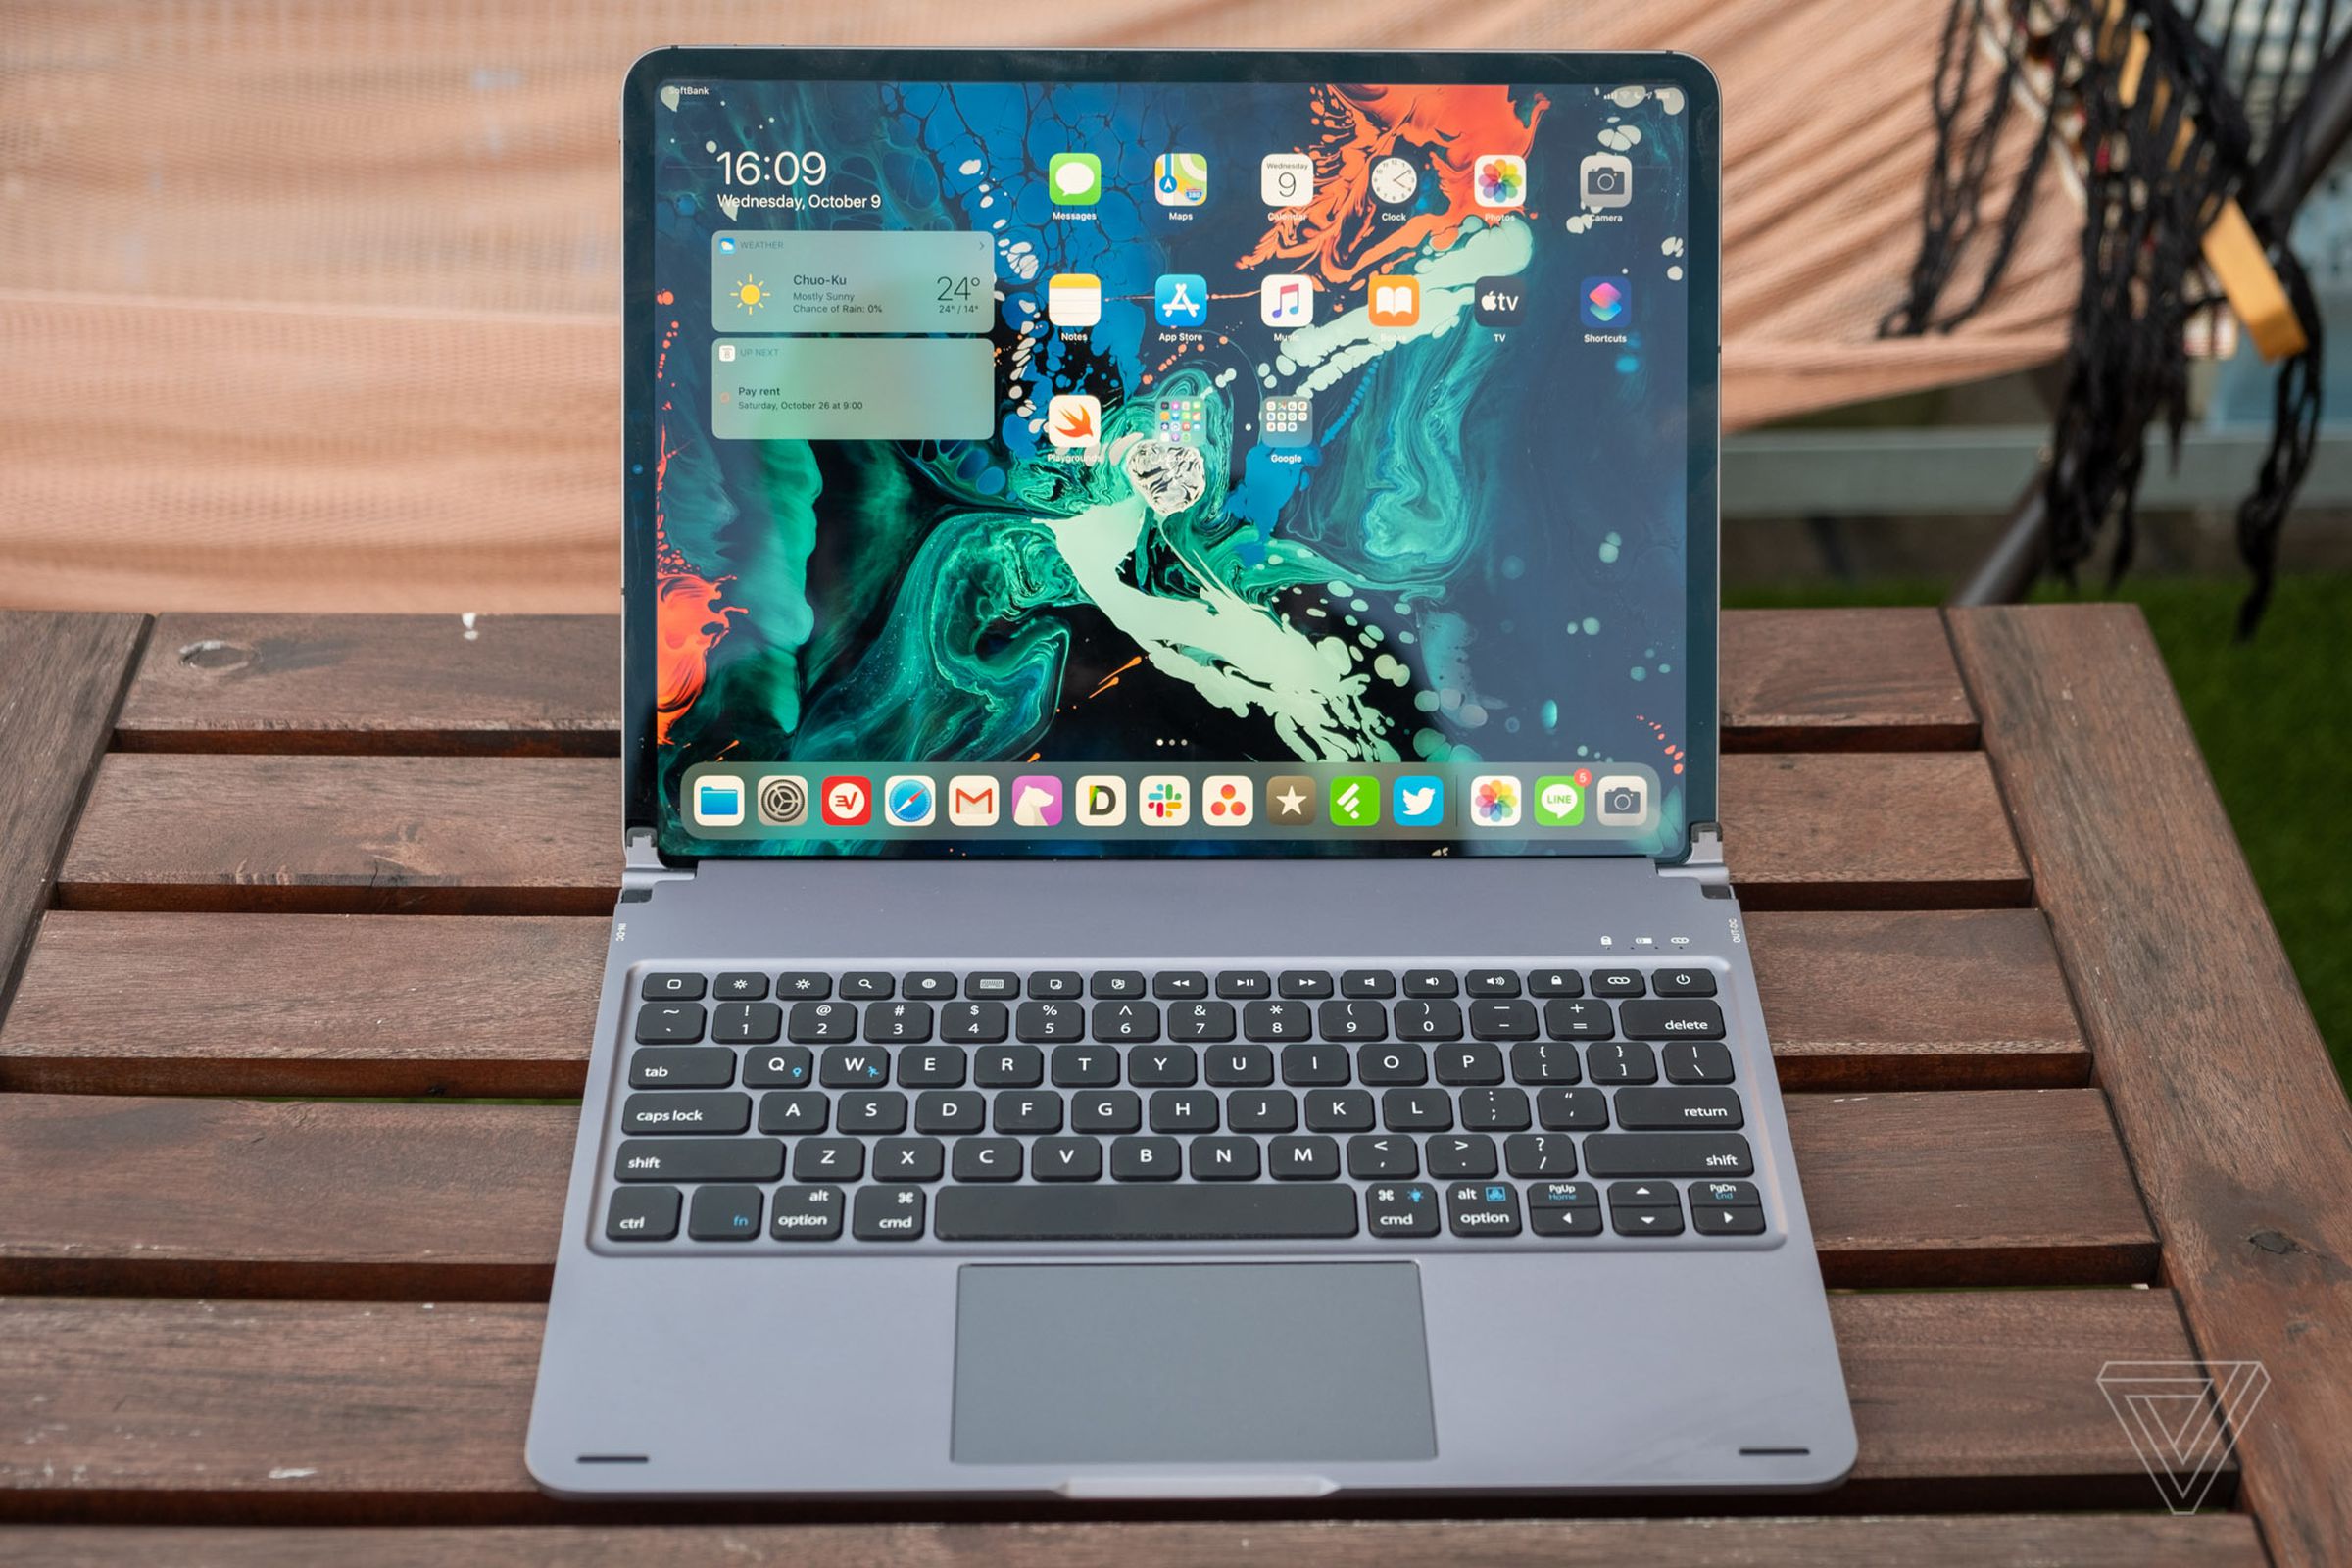 The Libra keyboard connected to an iPad Pro.